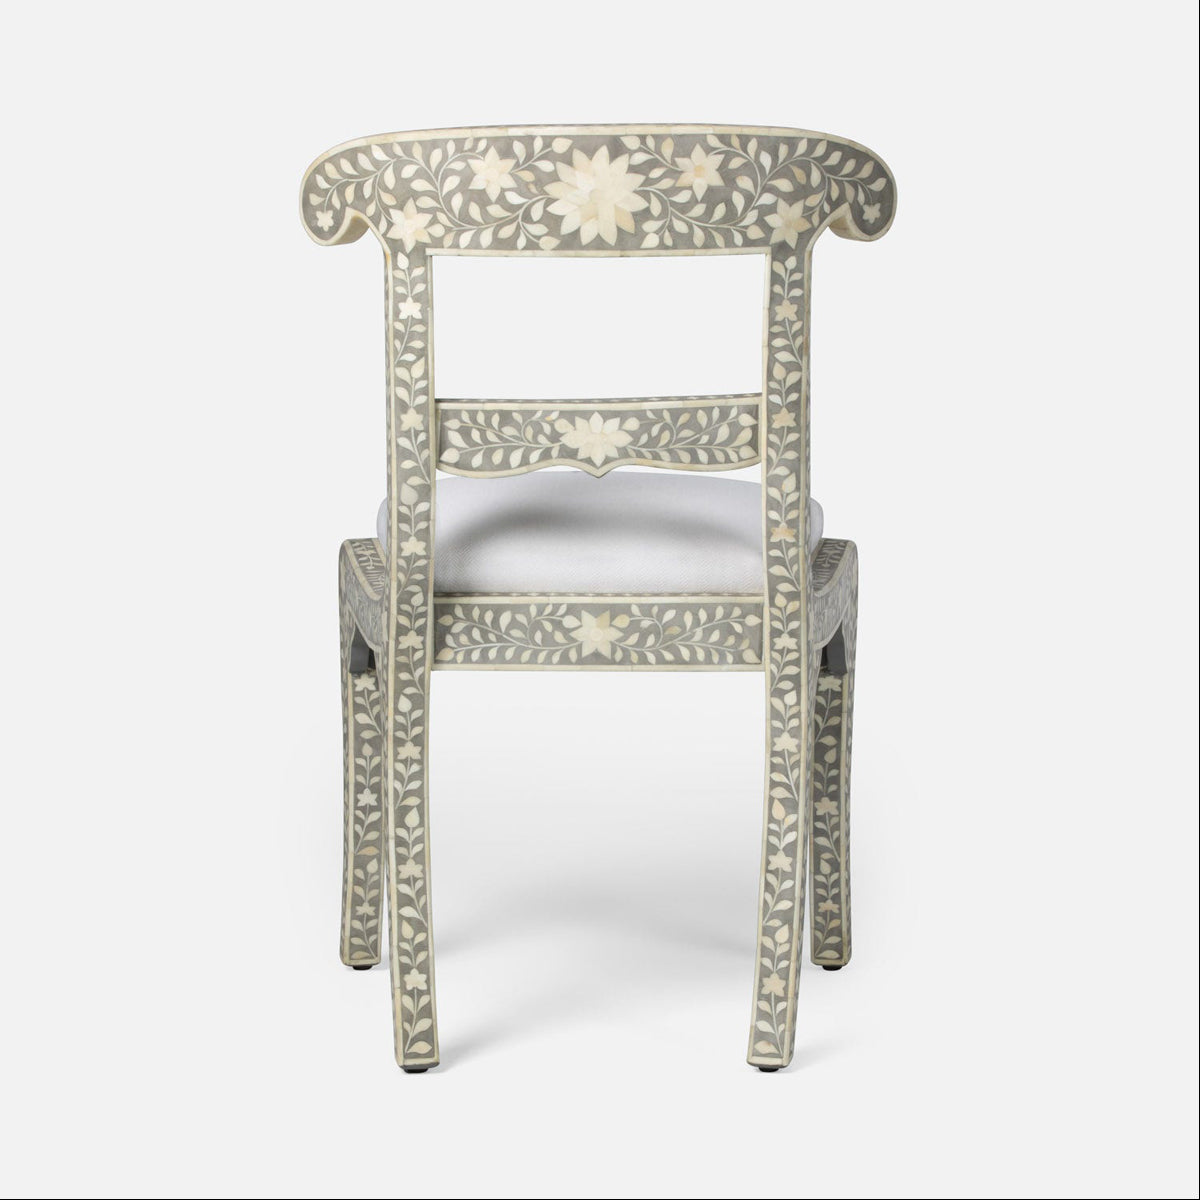 Made Goods Ines Rajasthan Bone Inlay Accent Chair in Gray Resin